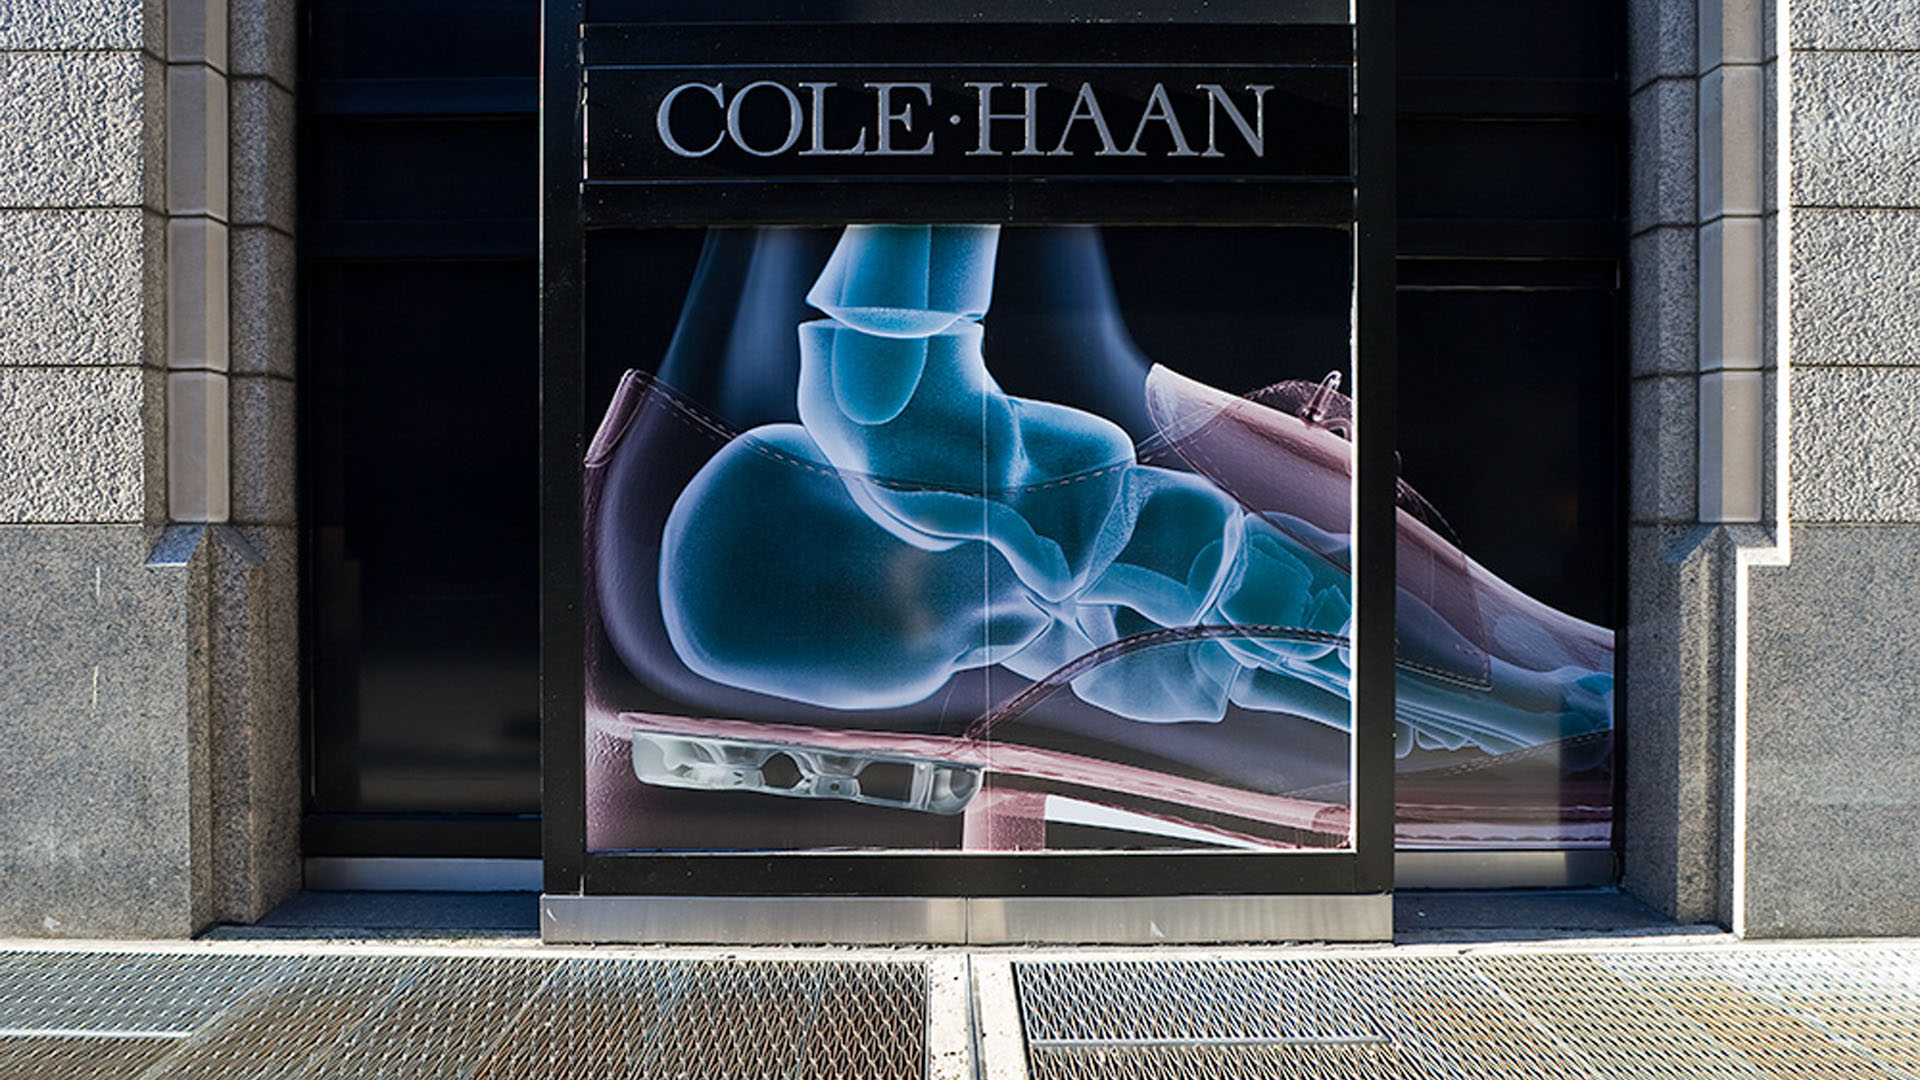 2007 | In-store promo for Cole Haan’s ‘AIR’ line of men’s and women’s shoes for their NY flagship store on Madison Avenue.Credits:Agency: Assouline IncCreative Director: Gary BreslinProducer: Forrest HeidlCG Artists: Nicholas Fischer, Michael Vicari, Justin AcreeLarge print renders: Nicholas FischerPhotography: Saul Metnick